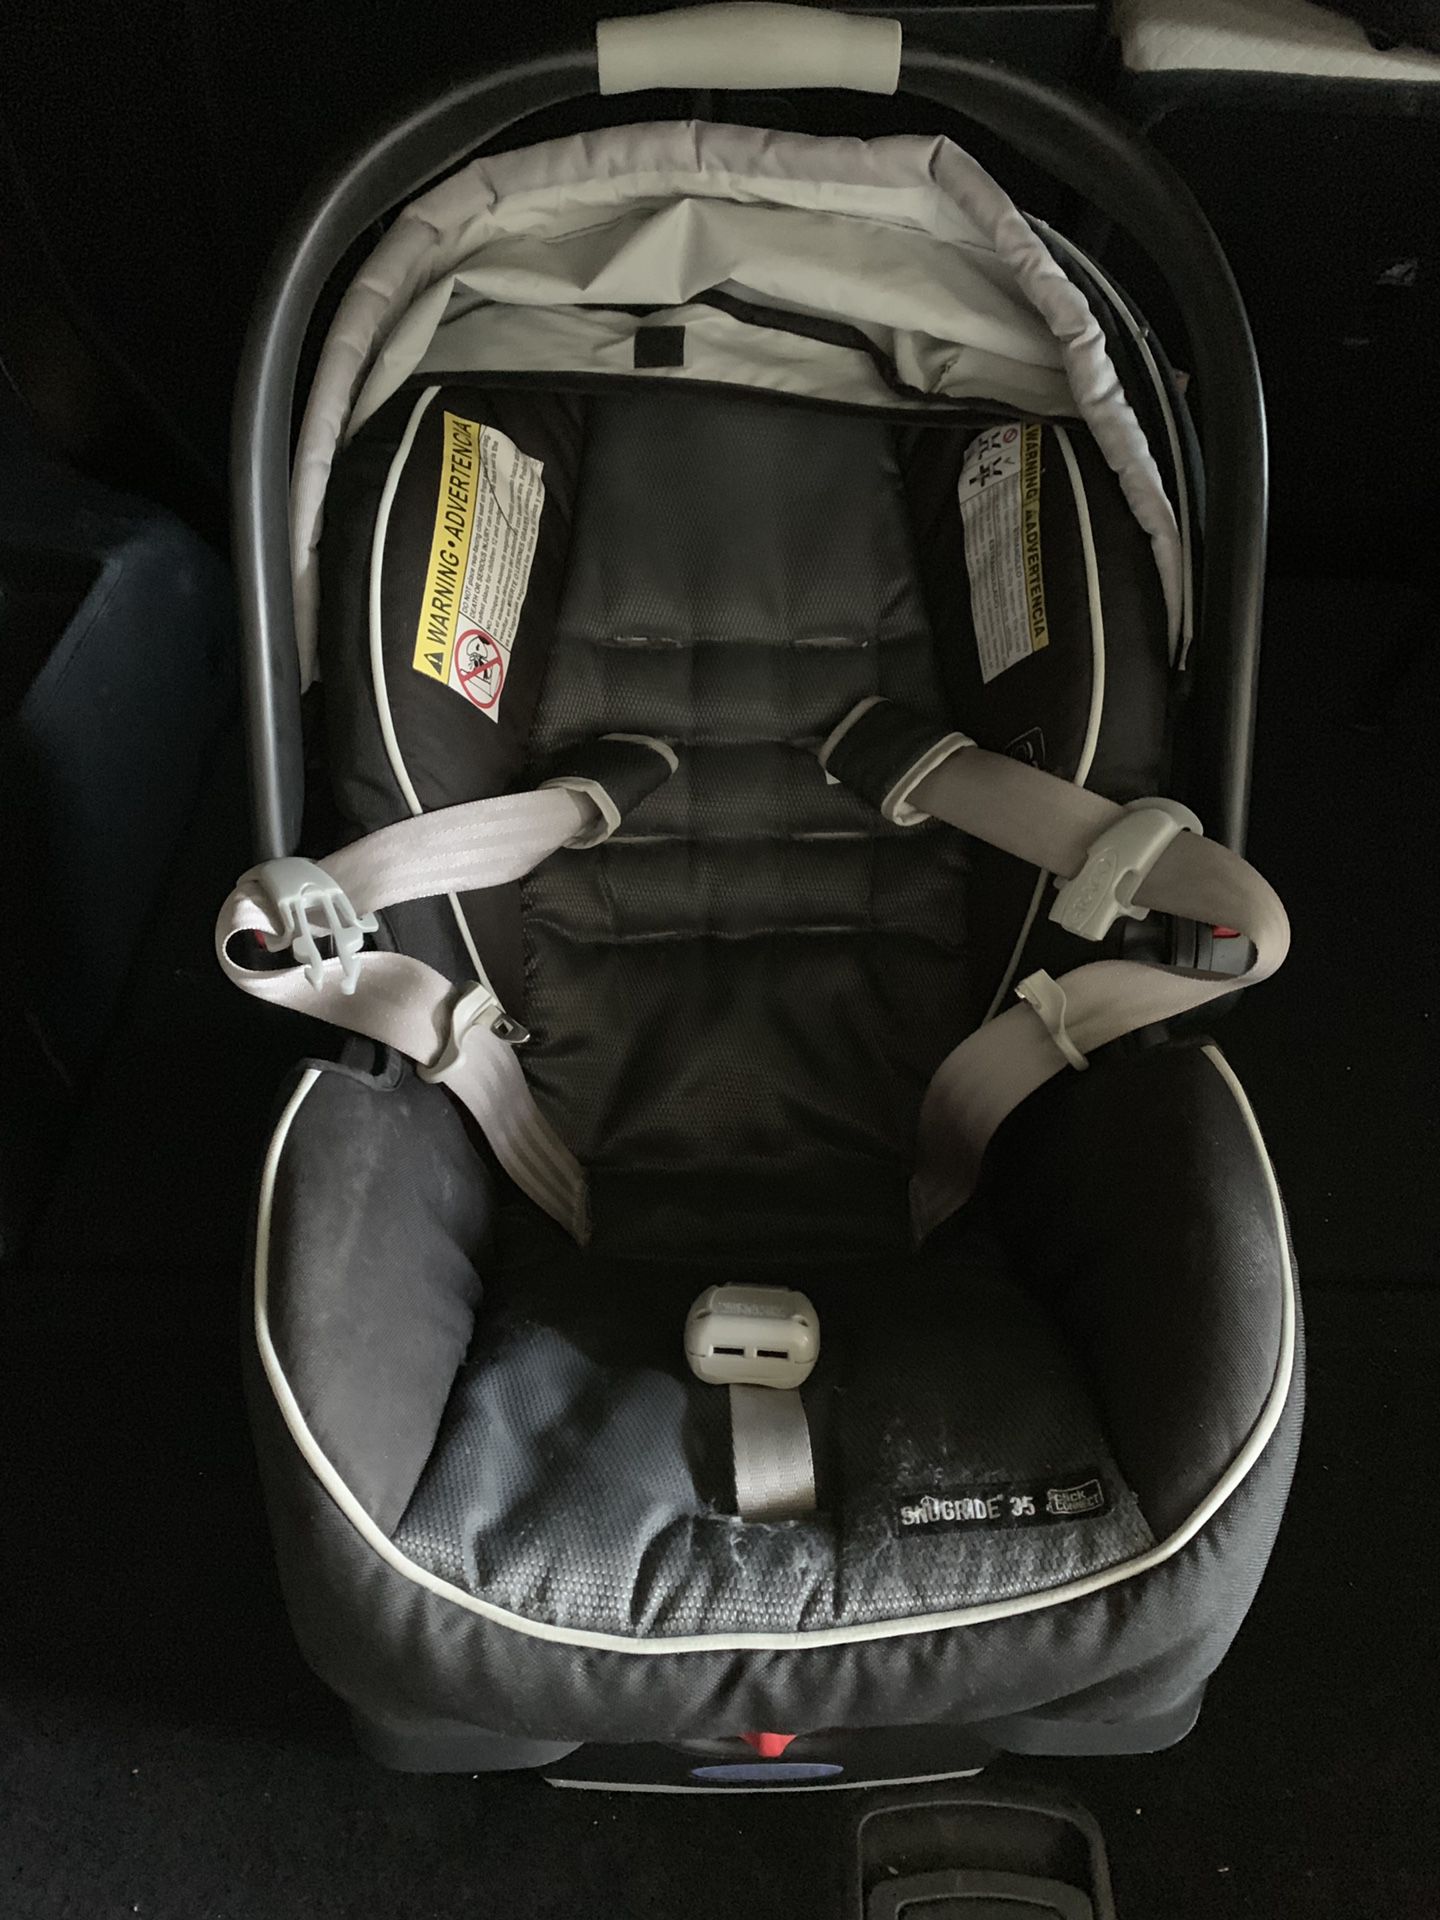 Graco click connect car seat, stroller, mobile